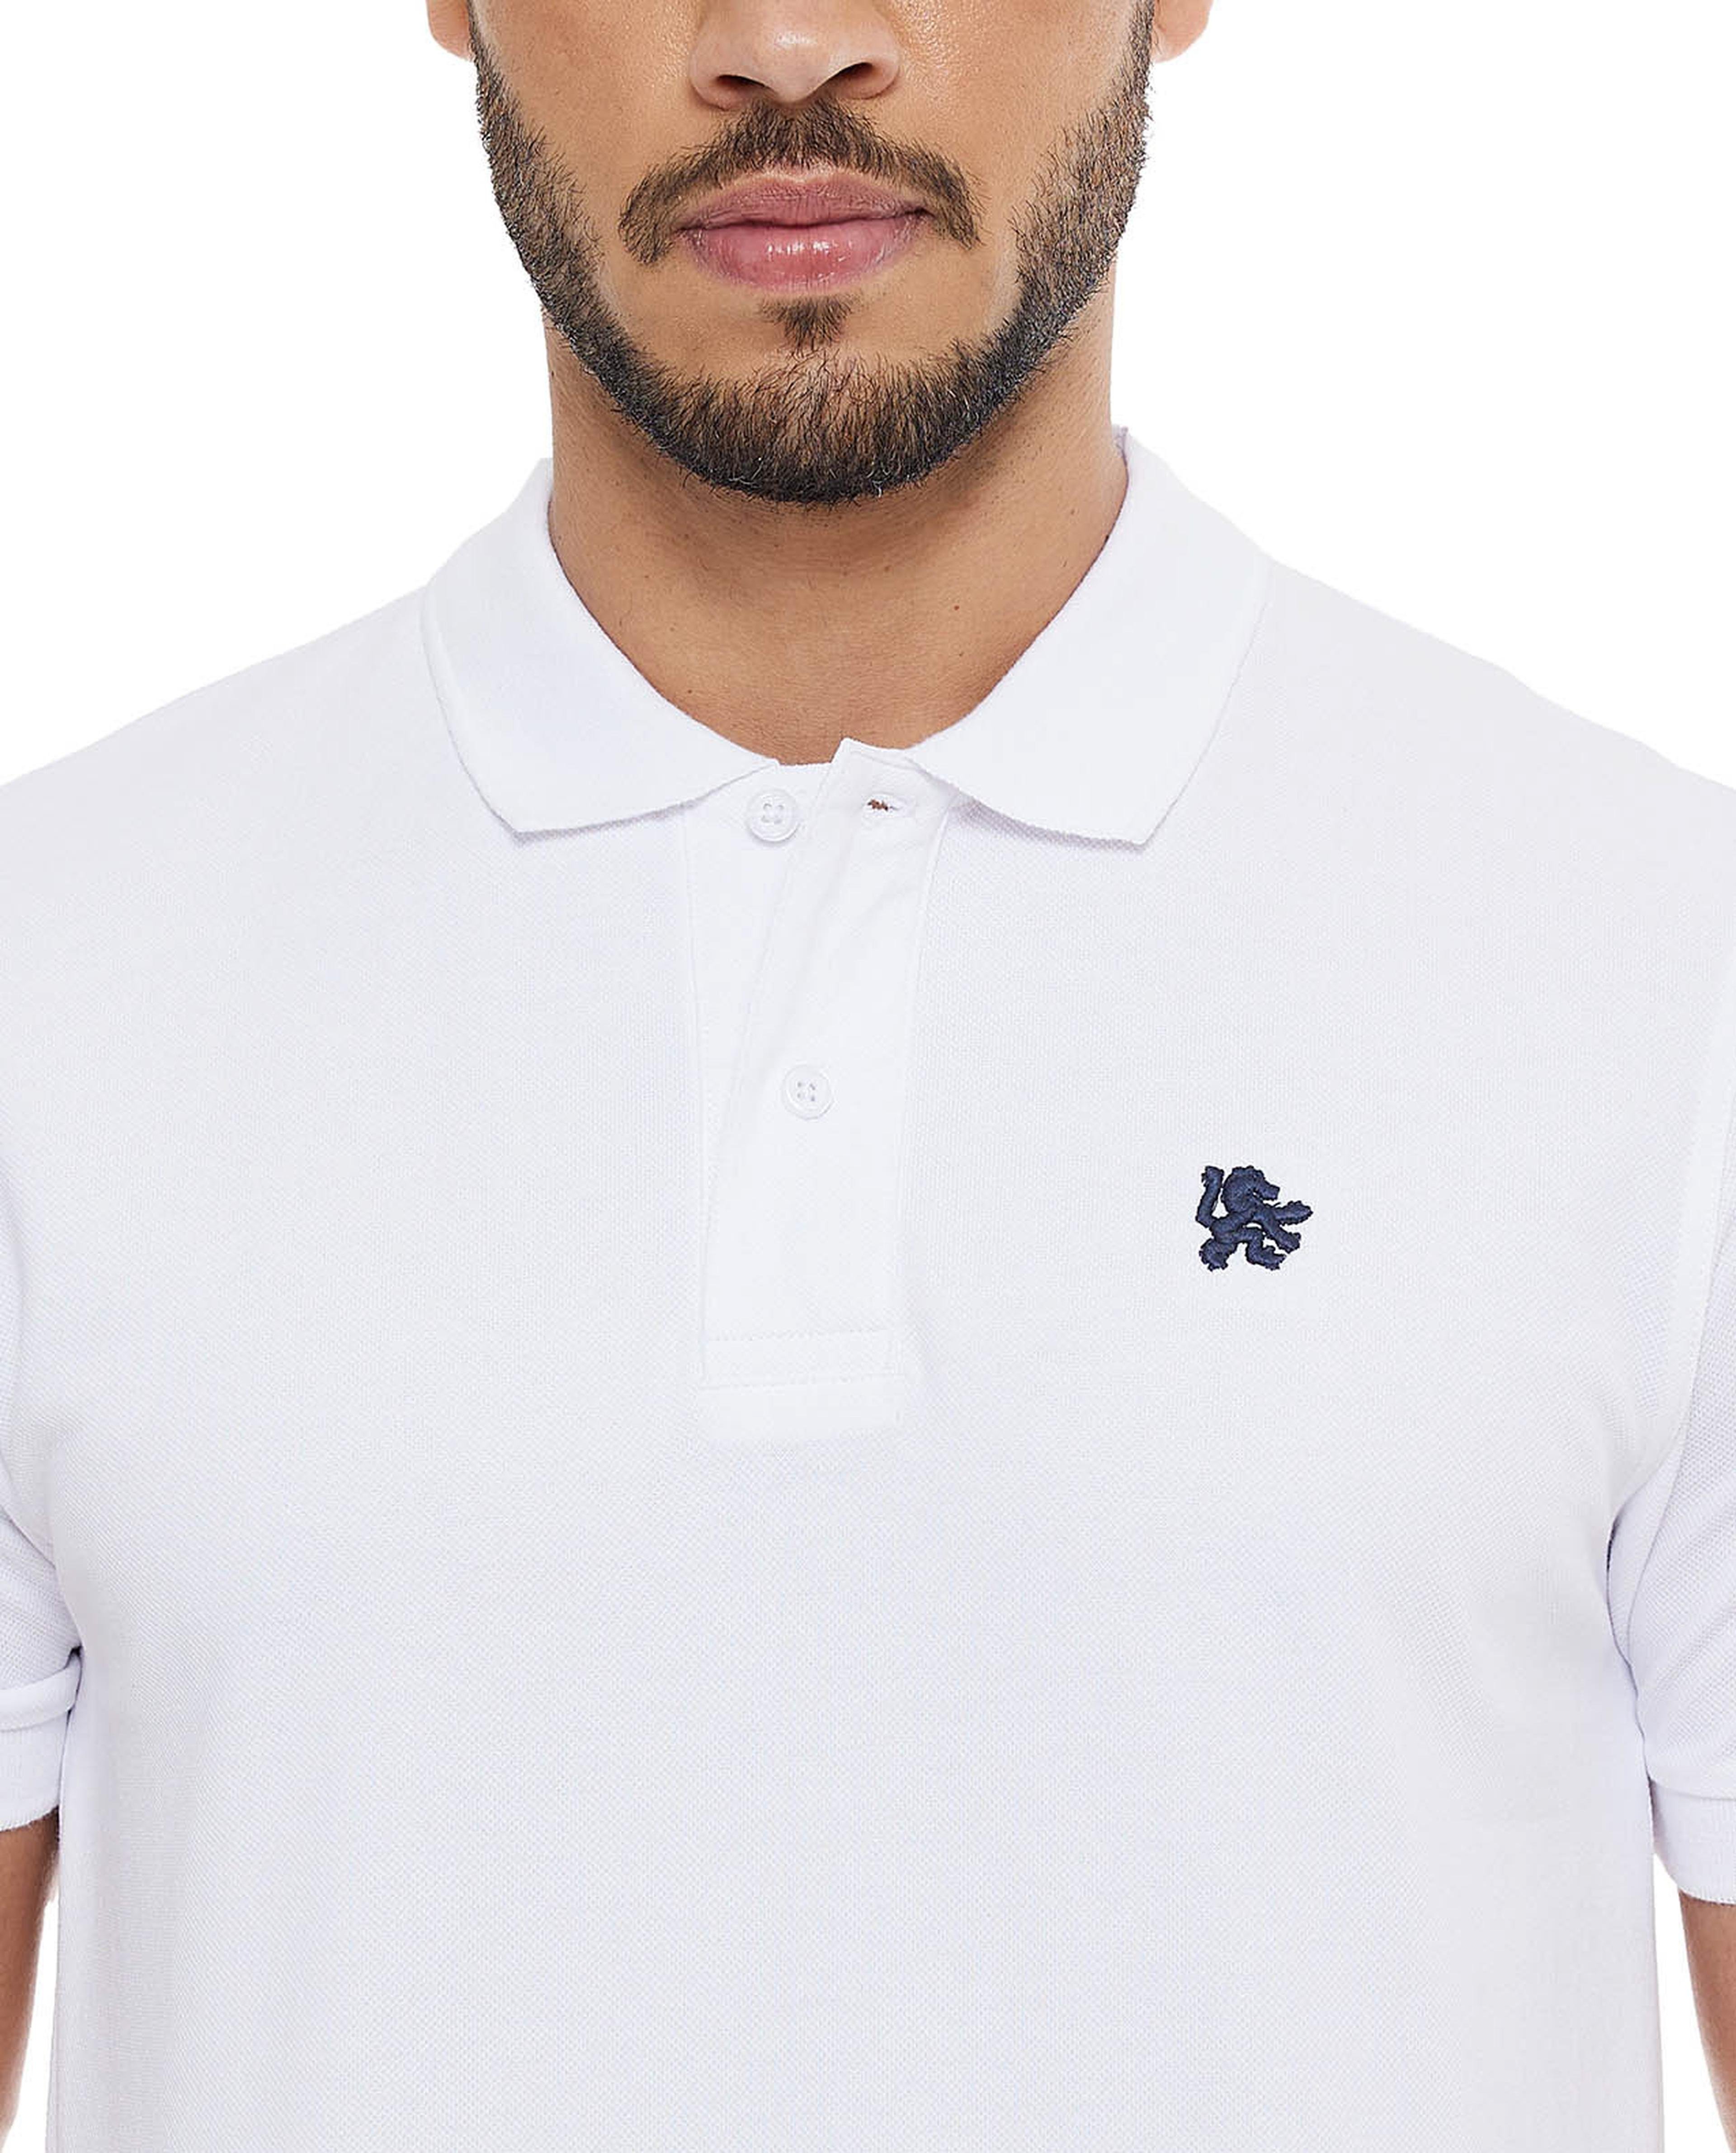 Embroidery Detail Polo T-Shirt with Short Sleeves